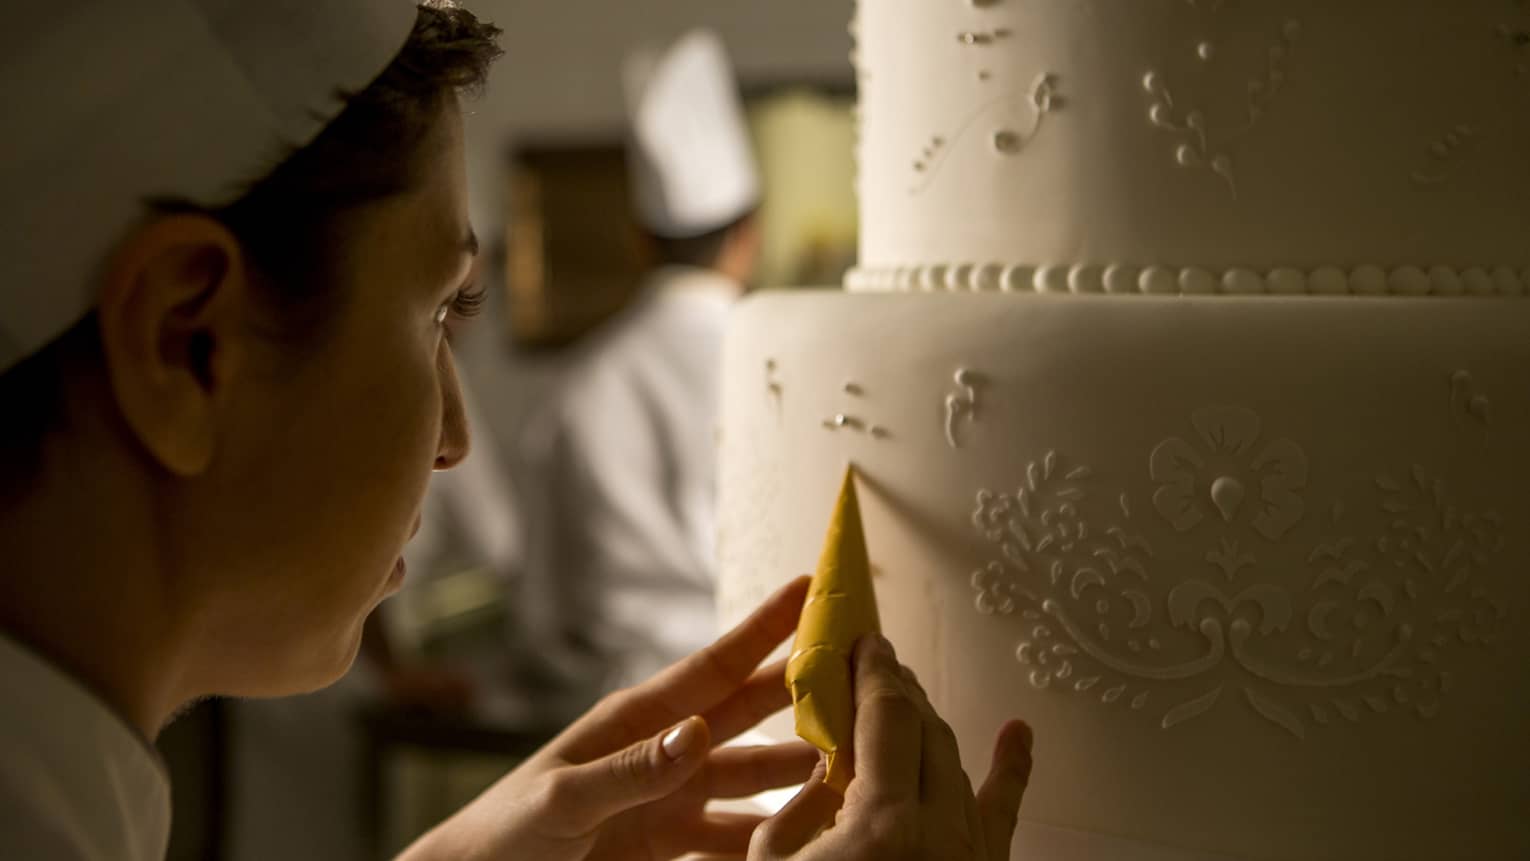 Pastry chef adds decorative details to tiered white wedding cake